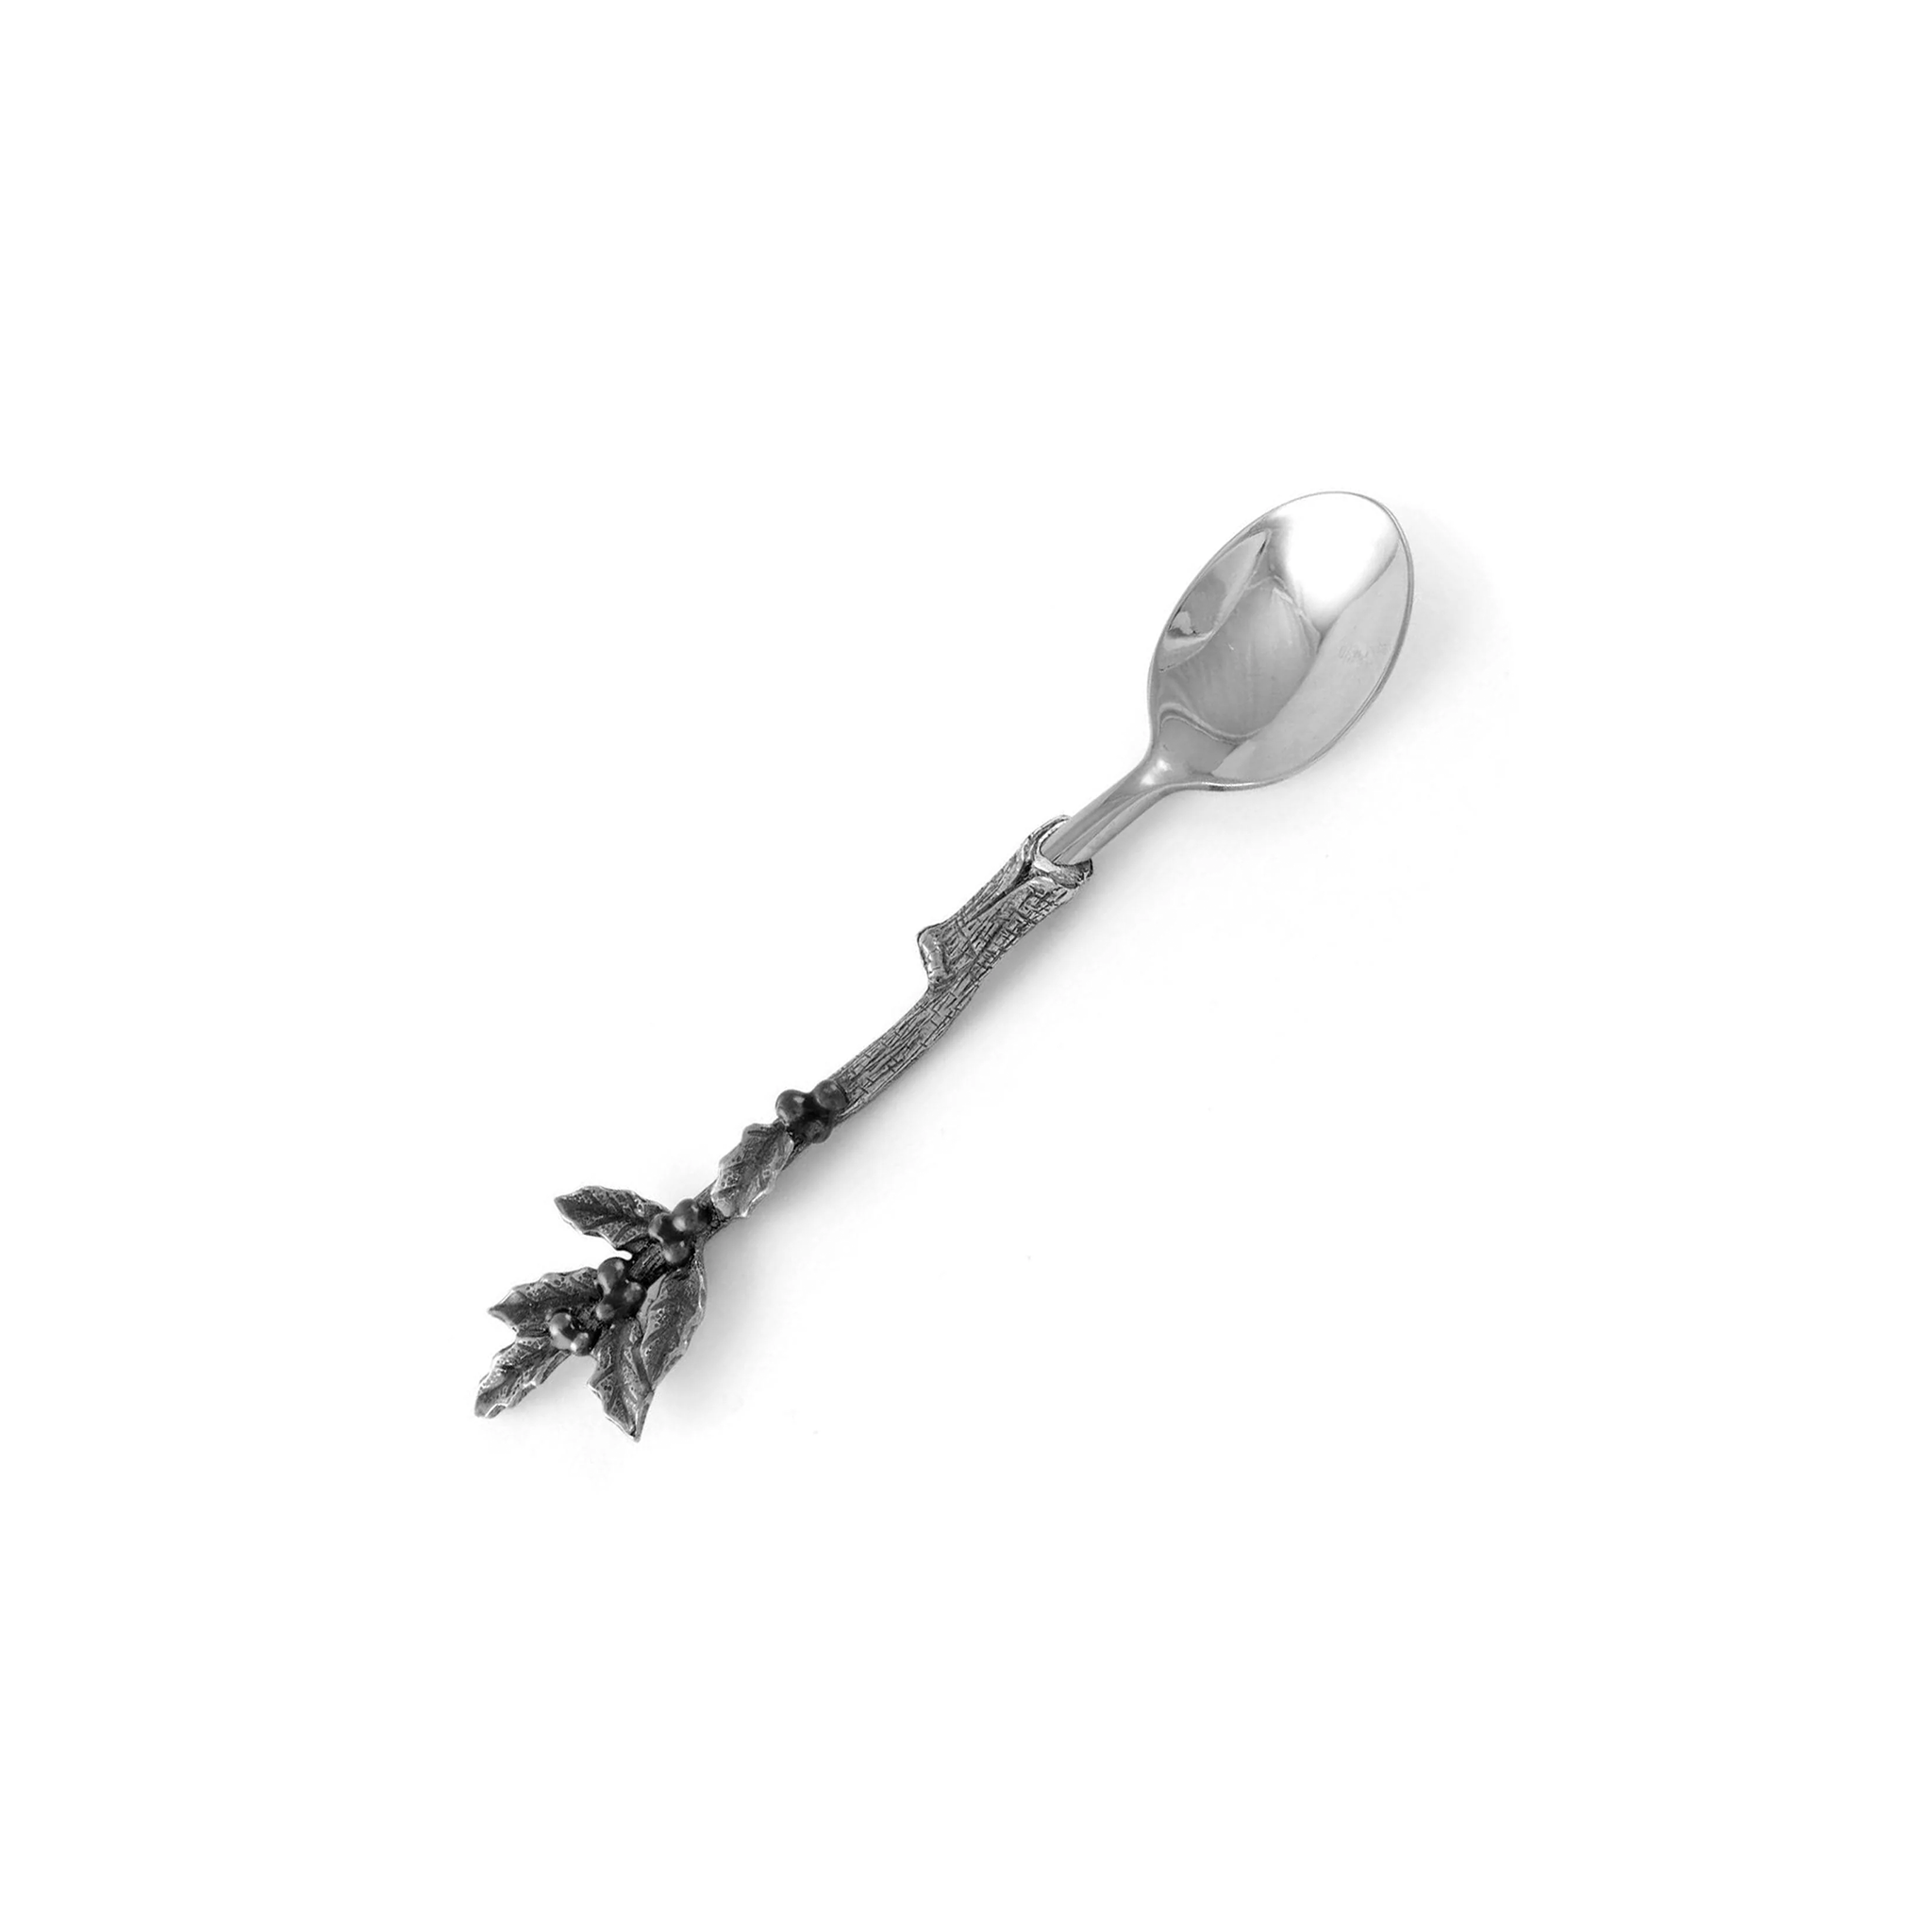 a polished pewter teaspoon with a handle ornately designed to resemble a holly branch, complete with leaves and berries, against a plain background